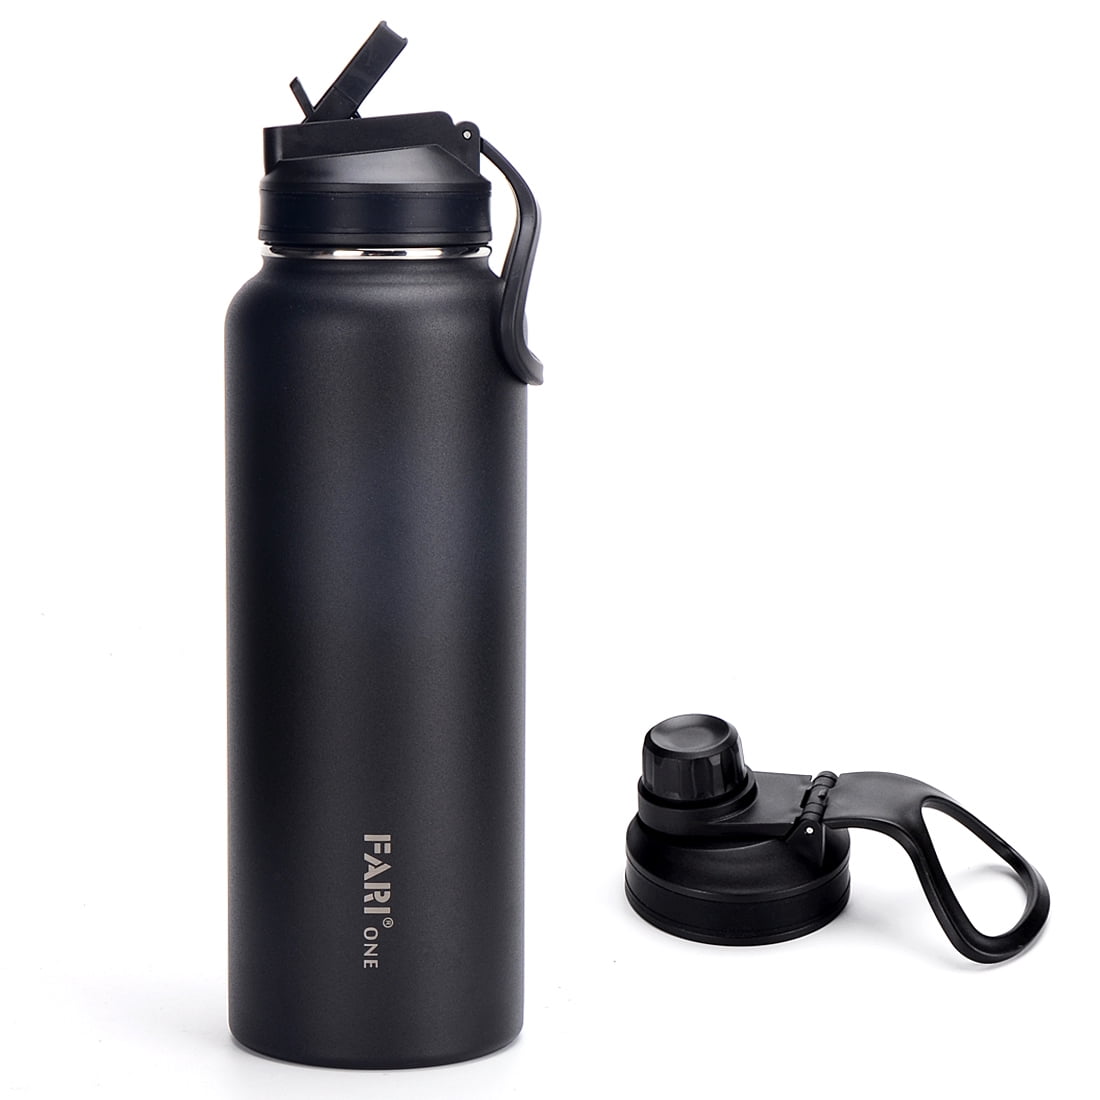 Insulated Water Bottle With 2 Lids By Cruet- Stainless Steel Double-Walled  Leakproof Thermos With Straw Lid For Cold Drinks, Flip Lid For Hot Beverages,  Vacuum Insulated, Reusable Modern Bottle- 32oz - Yahoo